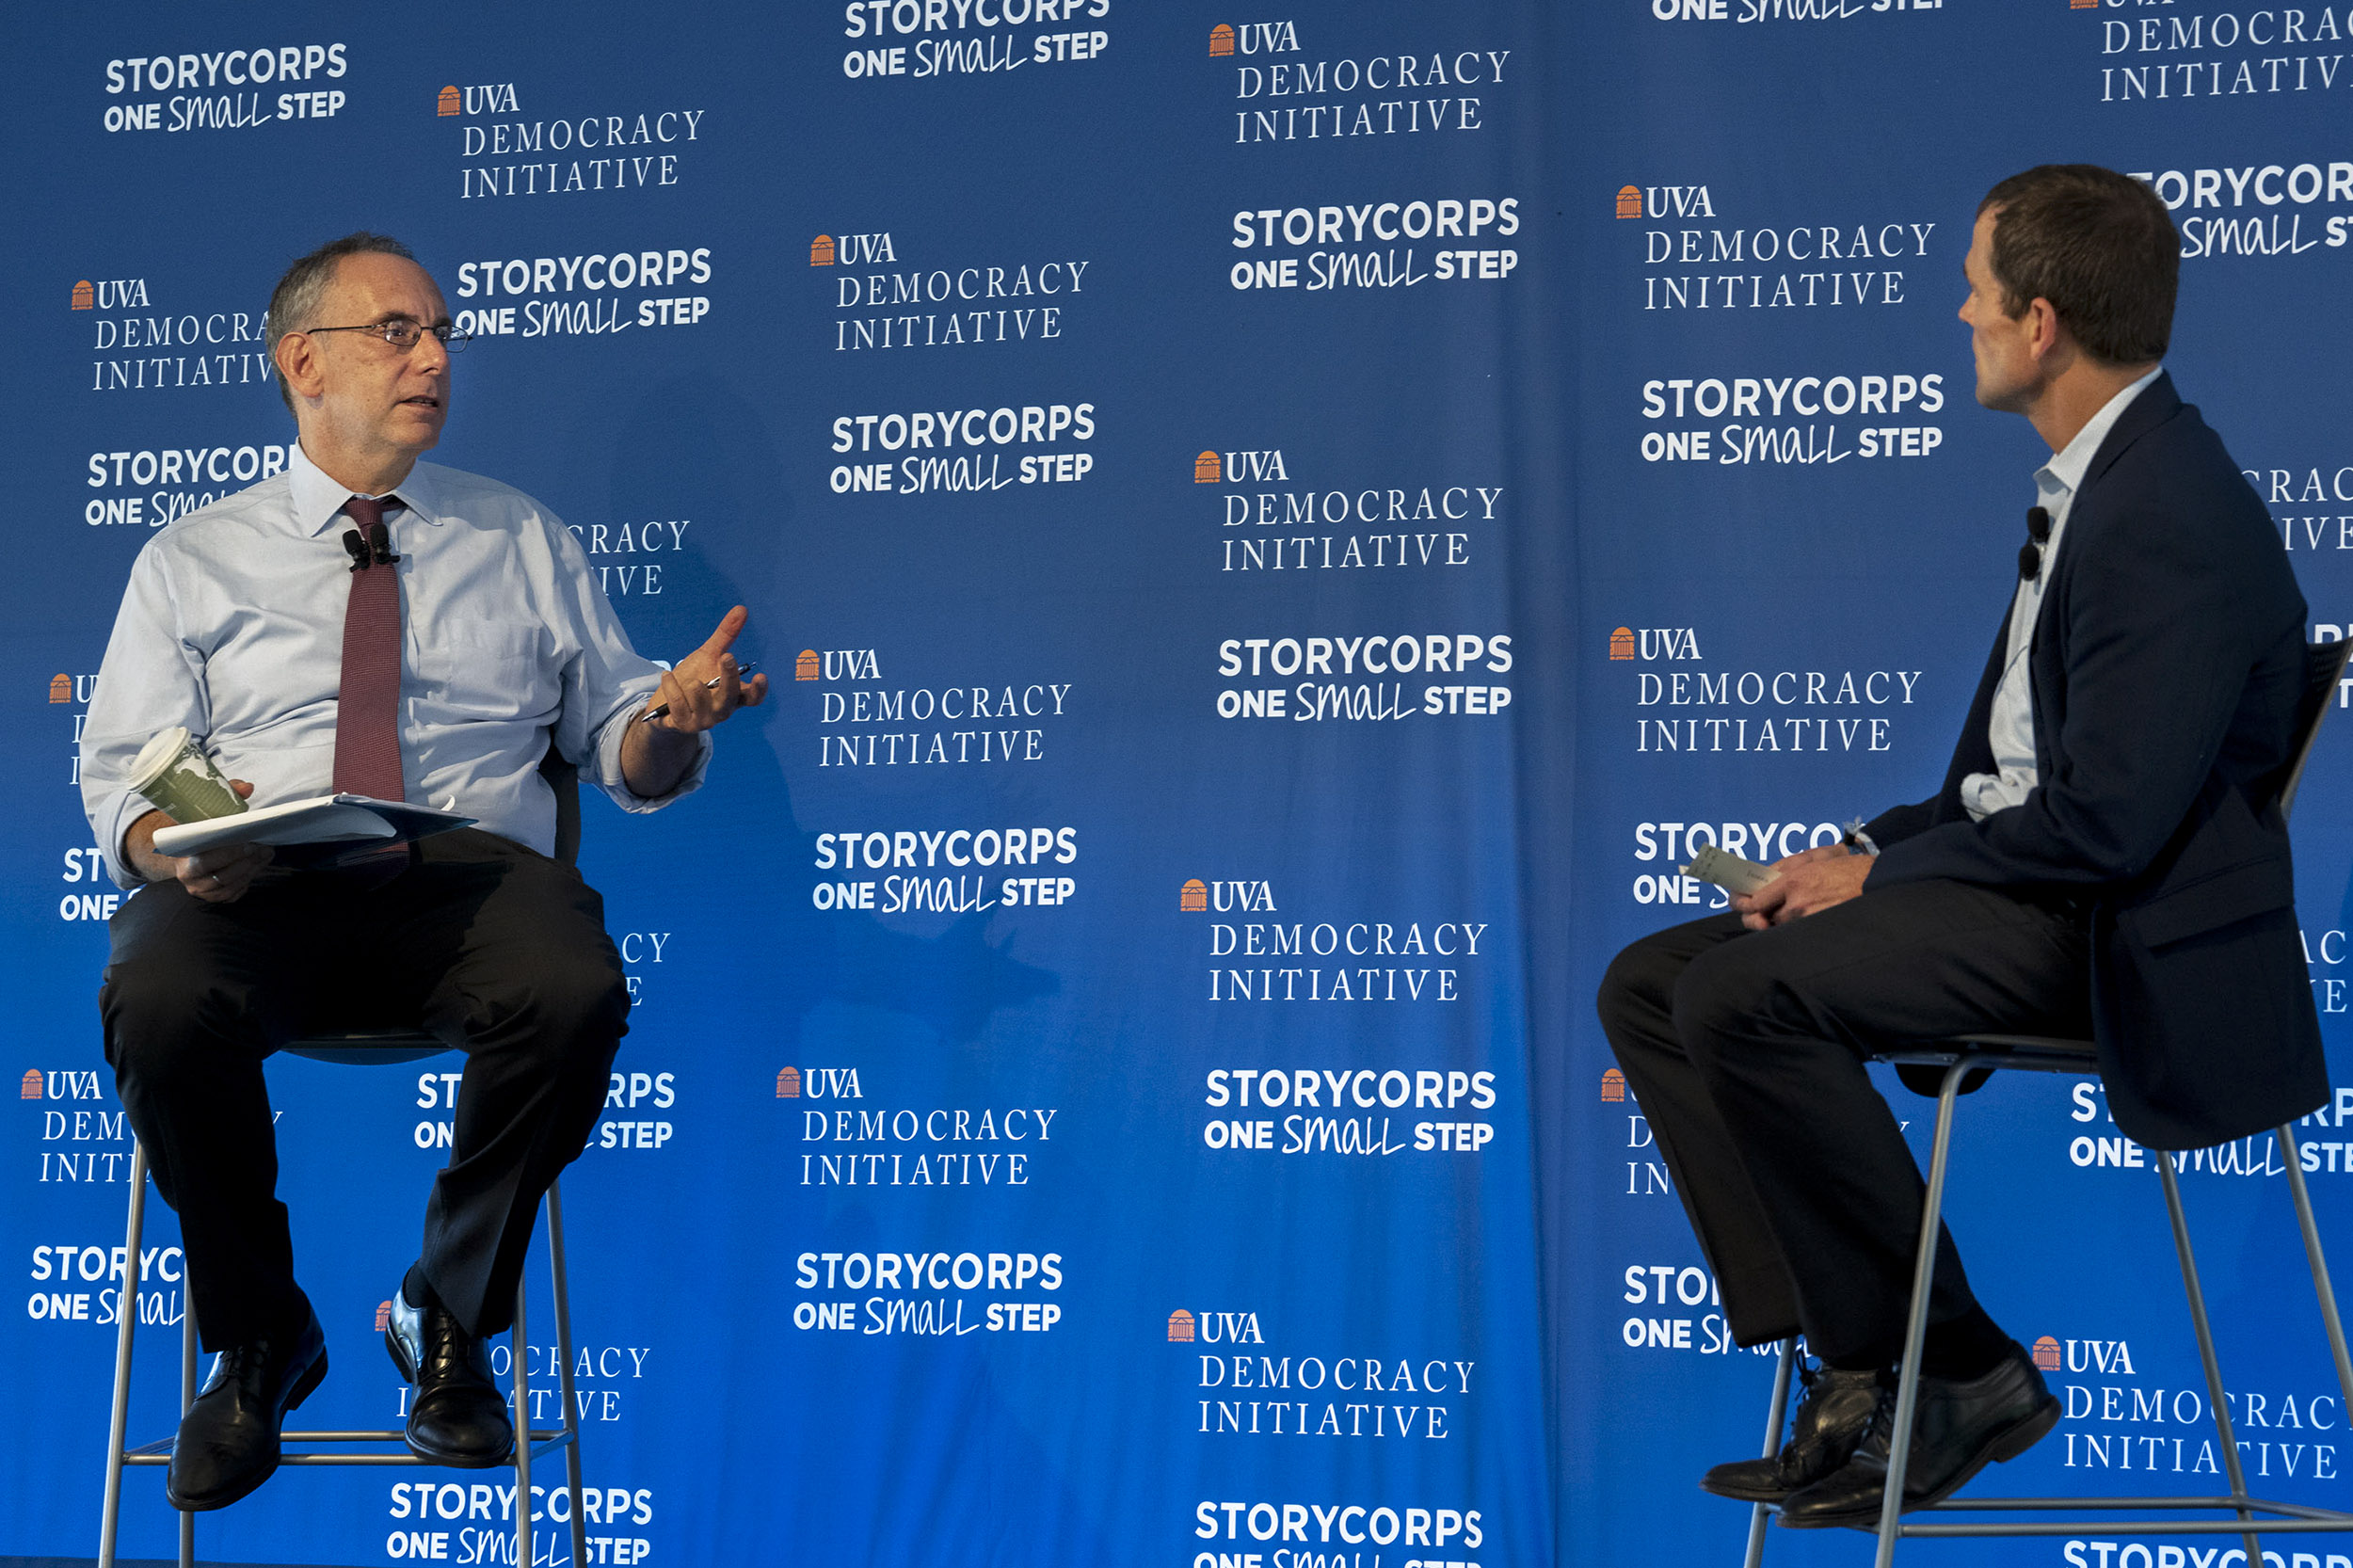 President Jim Ryan (right) speaking to another man on the UVA democracy Initiative stage